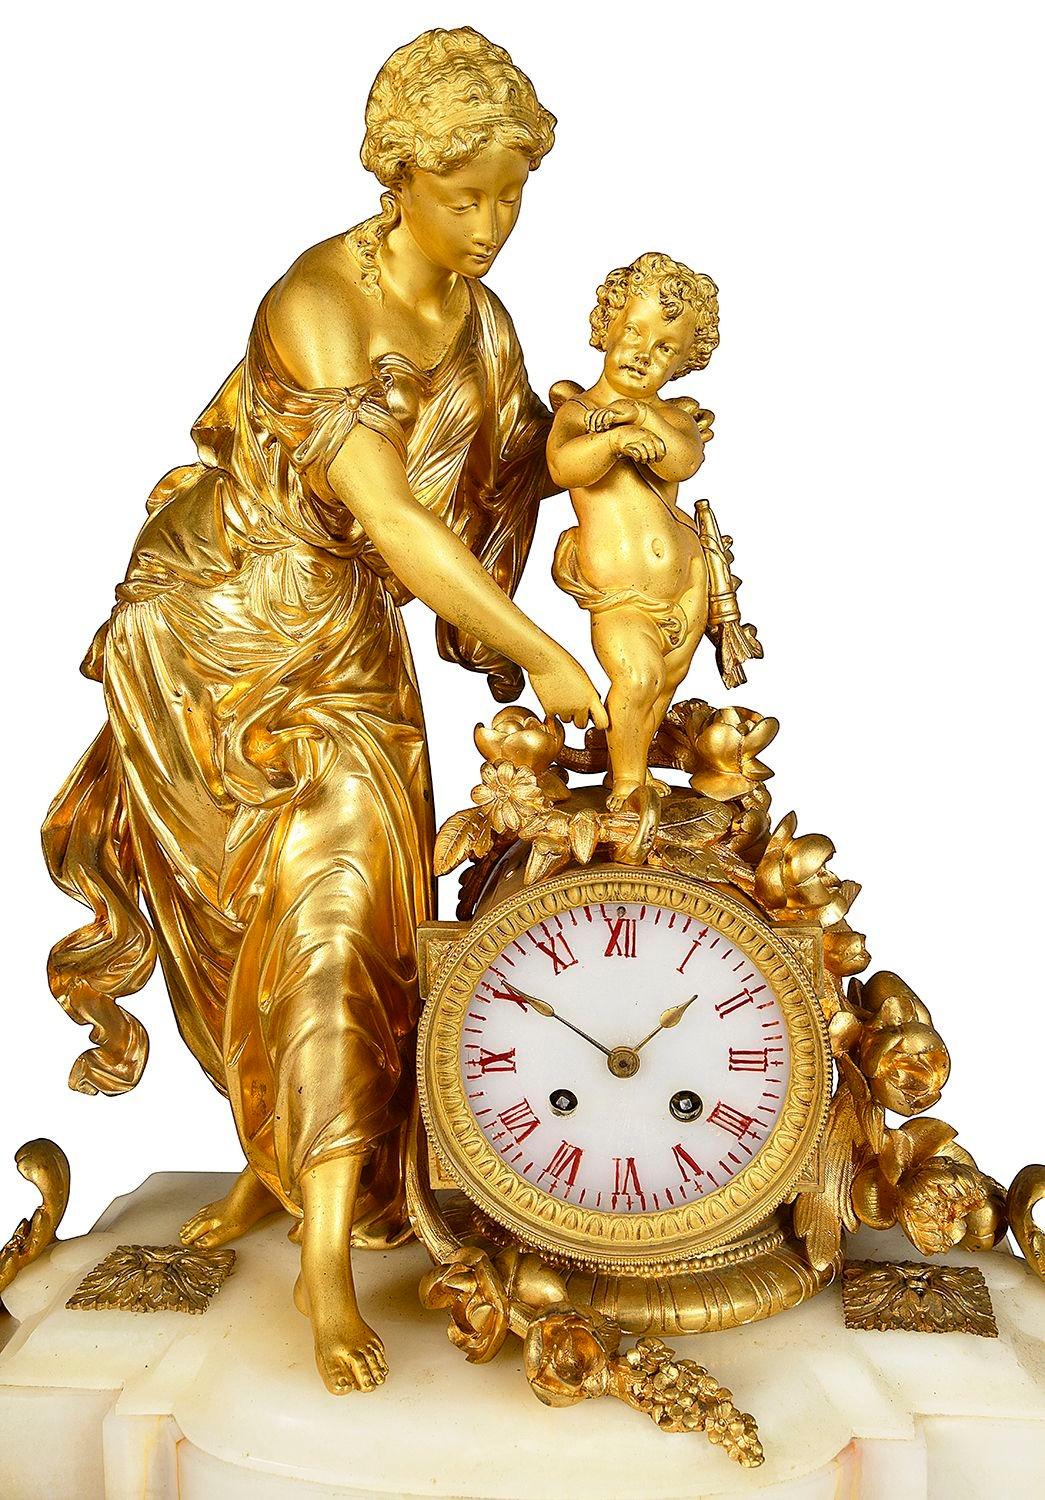 An enchanting French 19th Century white marble and gilded ormolu clock garniture, having a mother and childly the white enamel clock face, striking on the hour and half hour on a bell. Raised on a marble base with ormolu feet. Either side a pair of